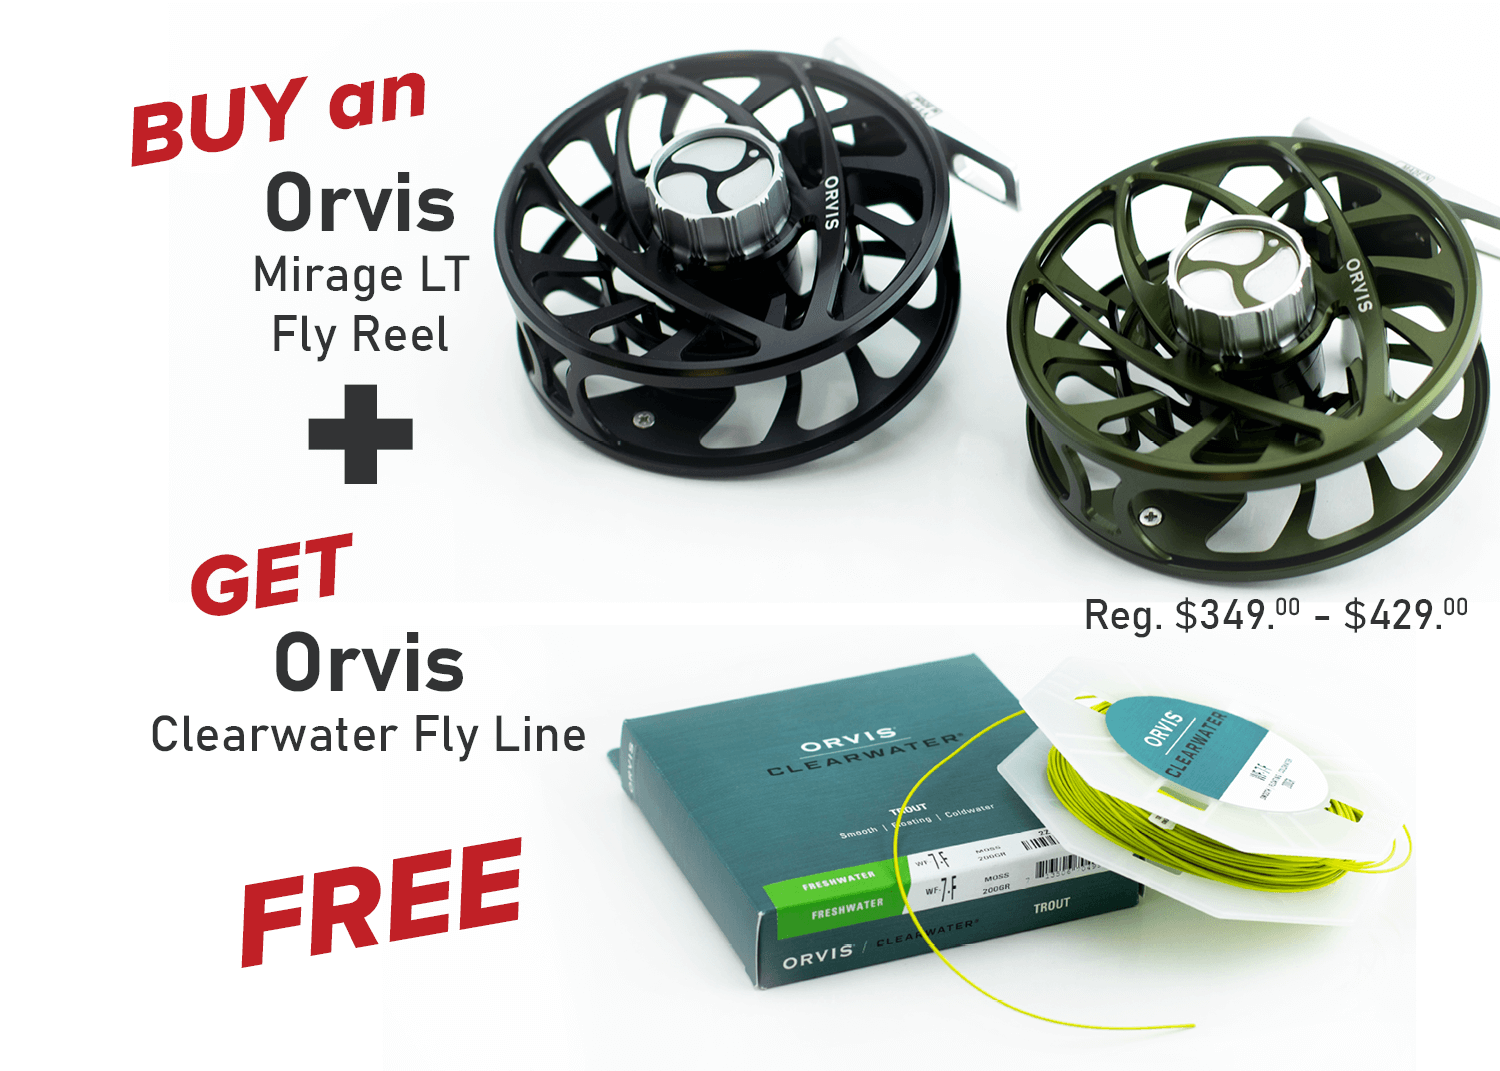 Buy a Orvis Mirage LT Fly Reel & Get FREE Orvis Clearwater Fly Line